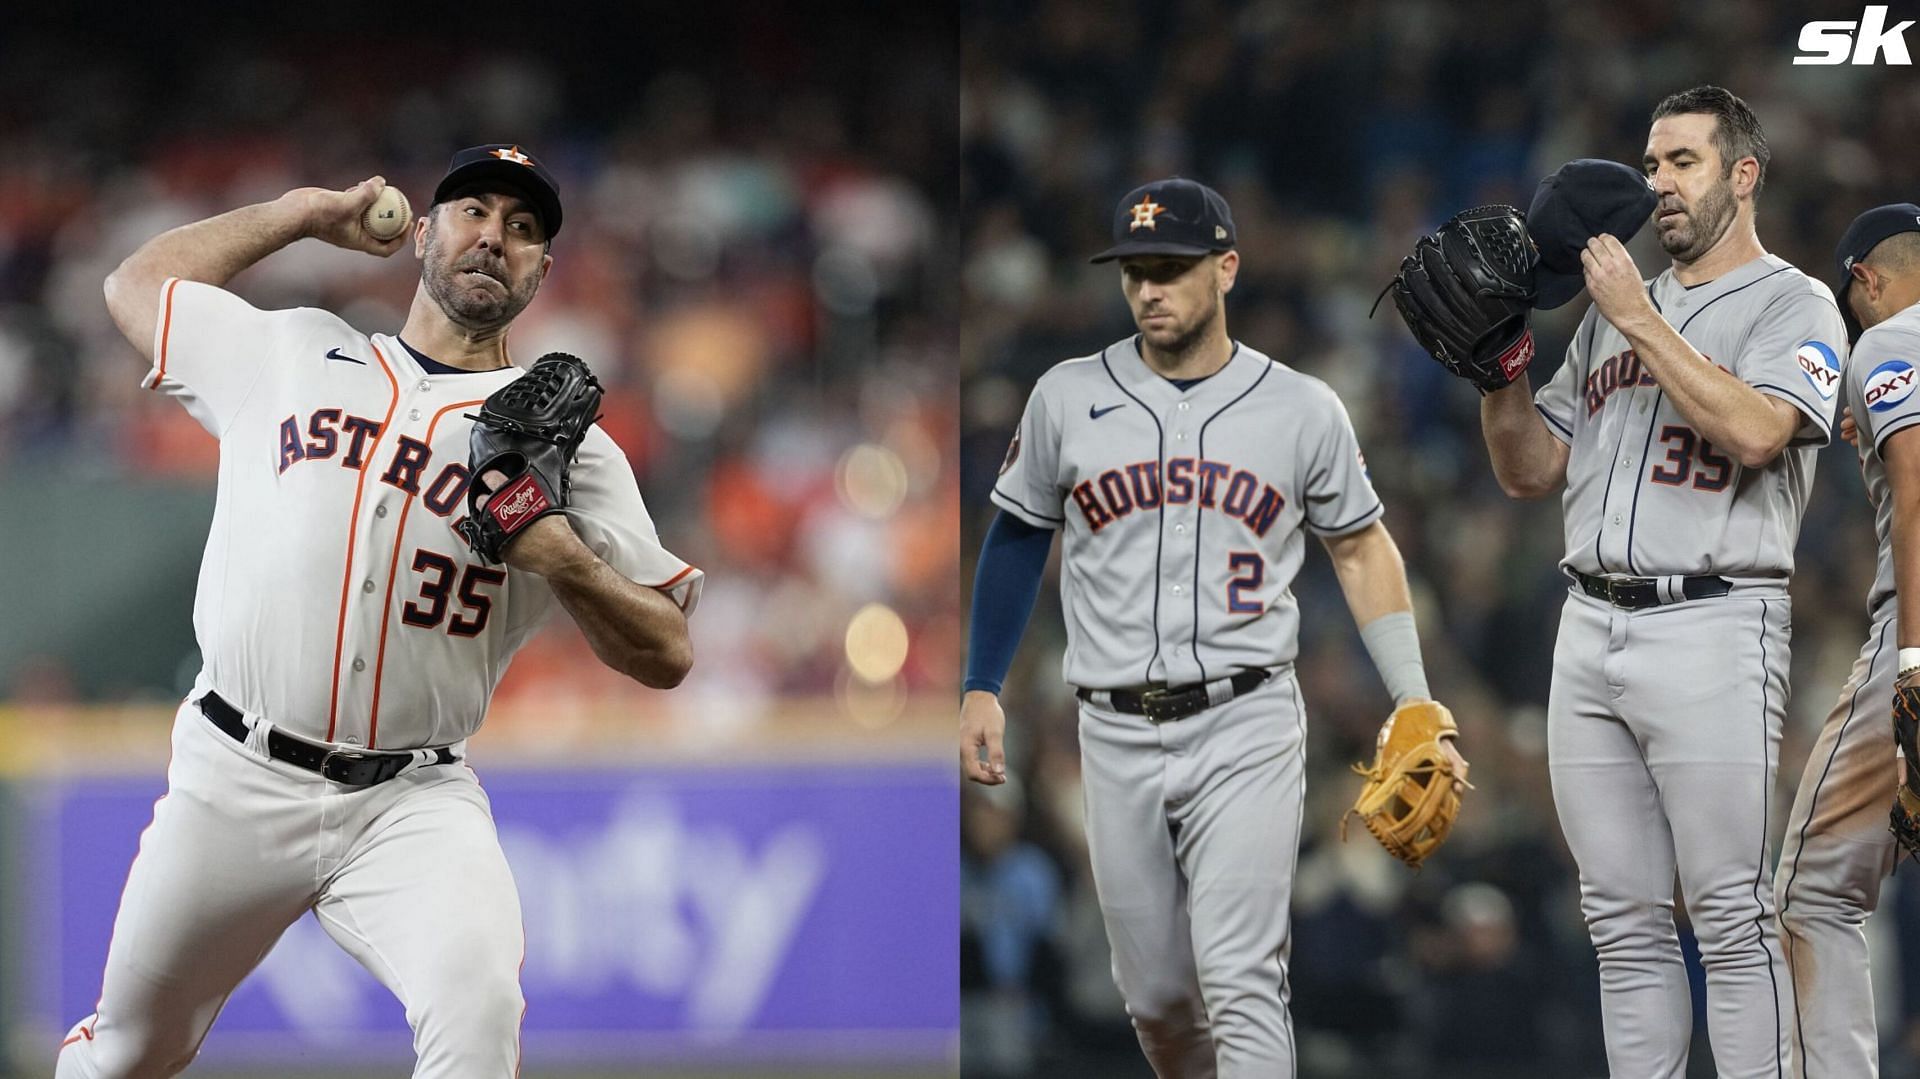 Justin Verlander wows Astros fans with phenomenal game against Twins